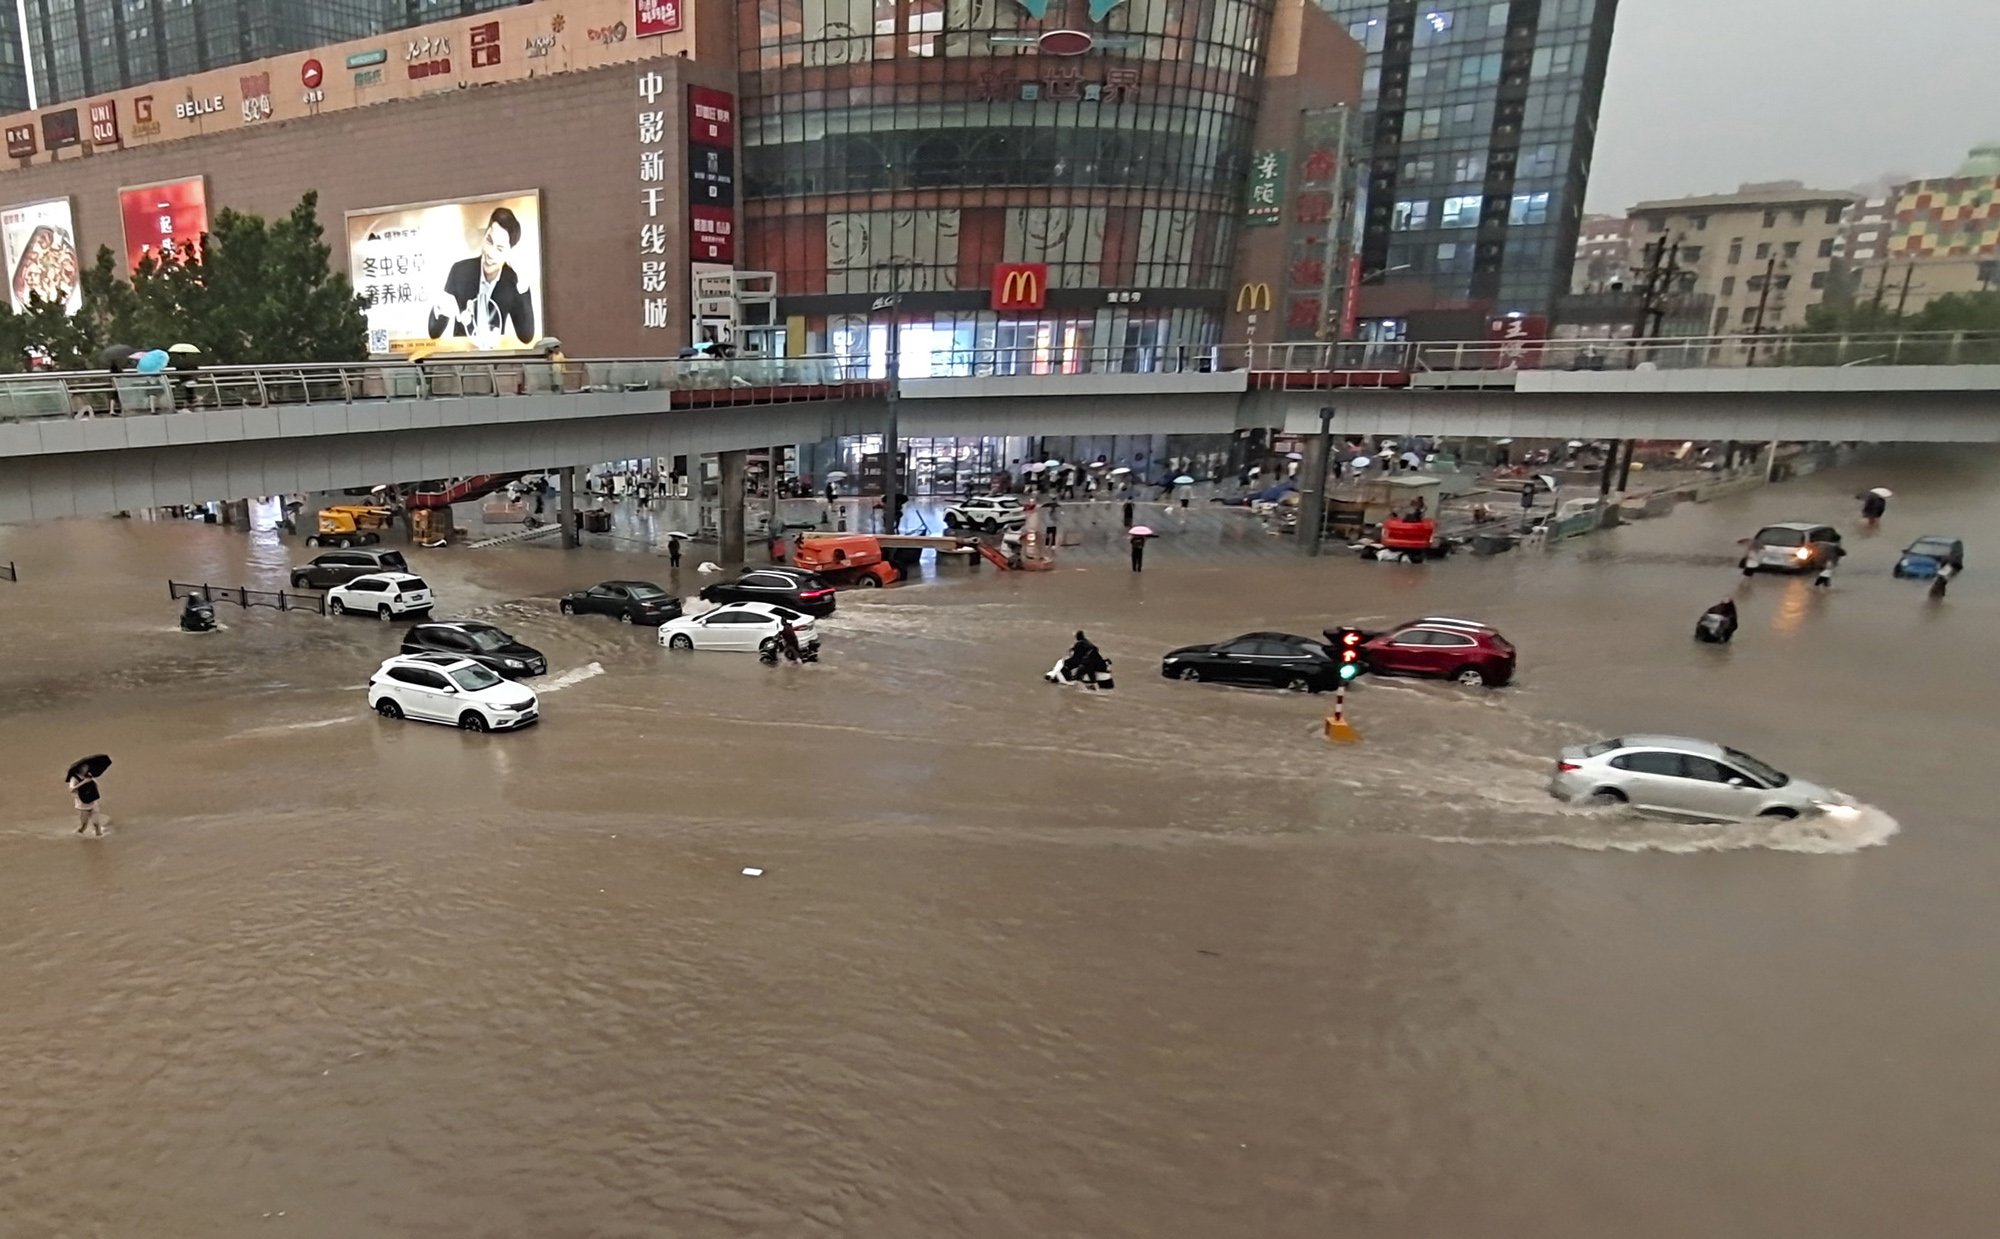 Zhengzhou after a heavy downpour in central China’s Henan province on July 20.